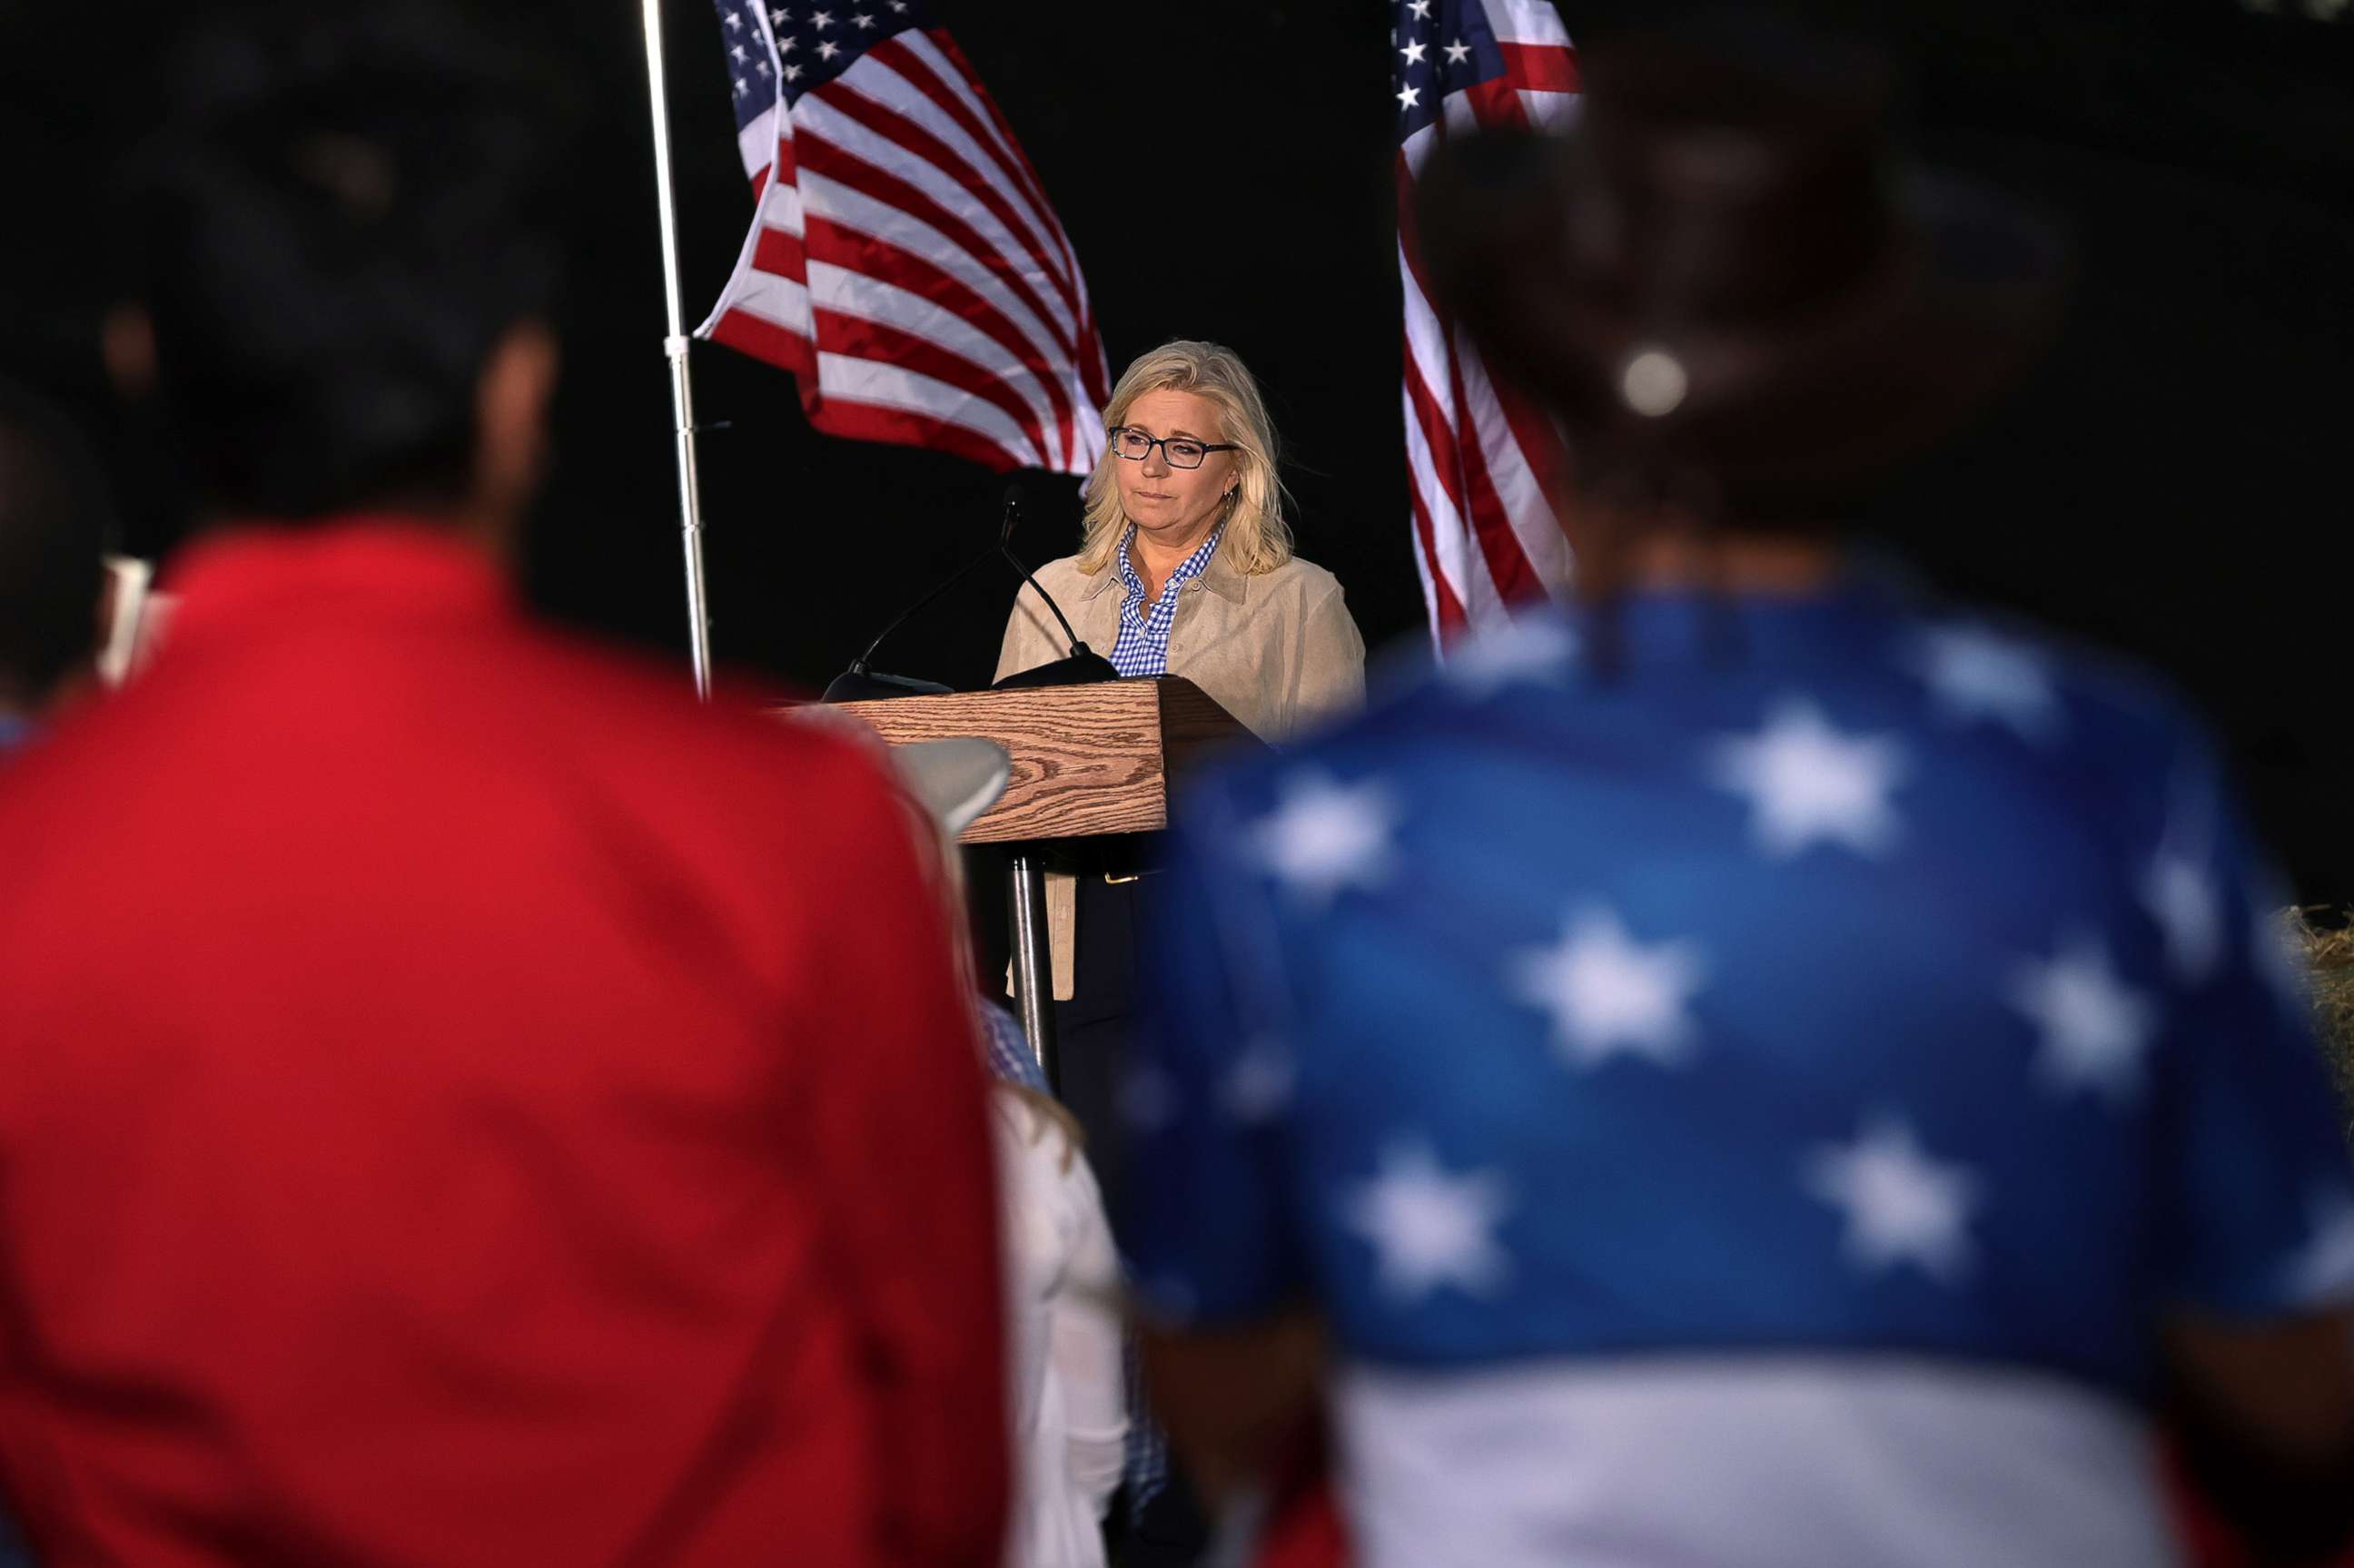 PHOTO: Rep. Liz Cheney gives a concession speech to supporters during a primary night event, Aug. 16, 2022, in Jackson, Wyo. 